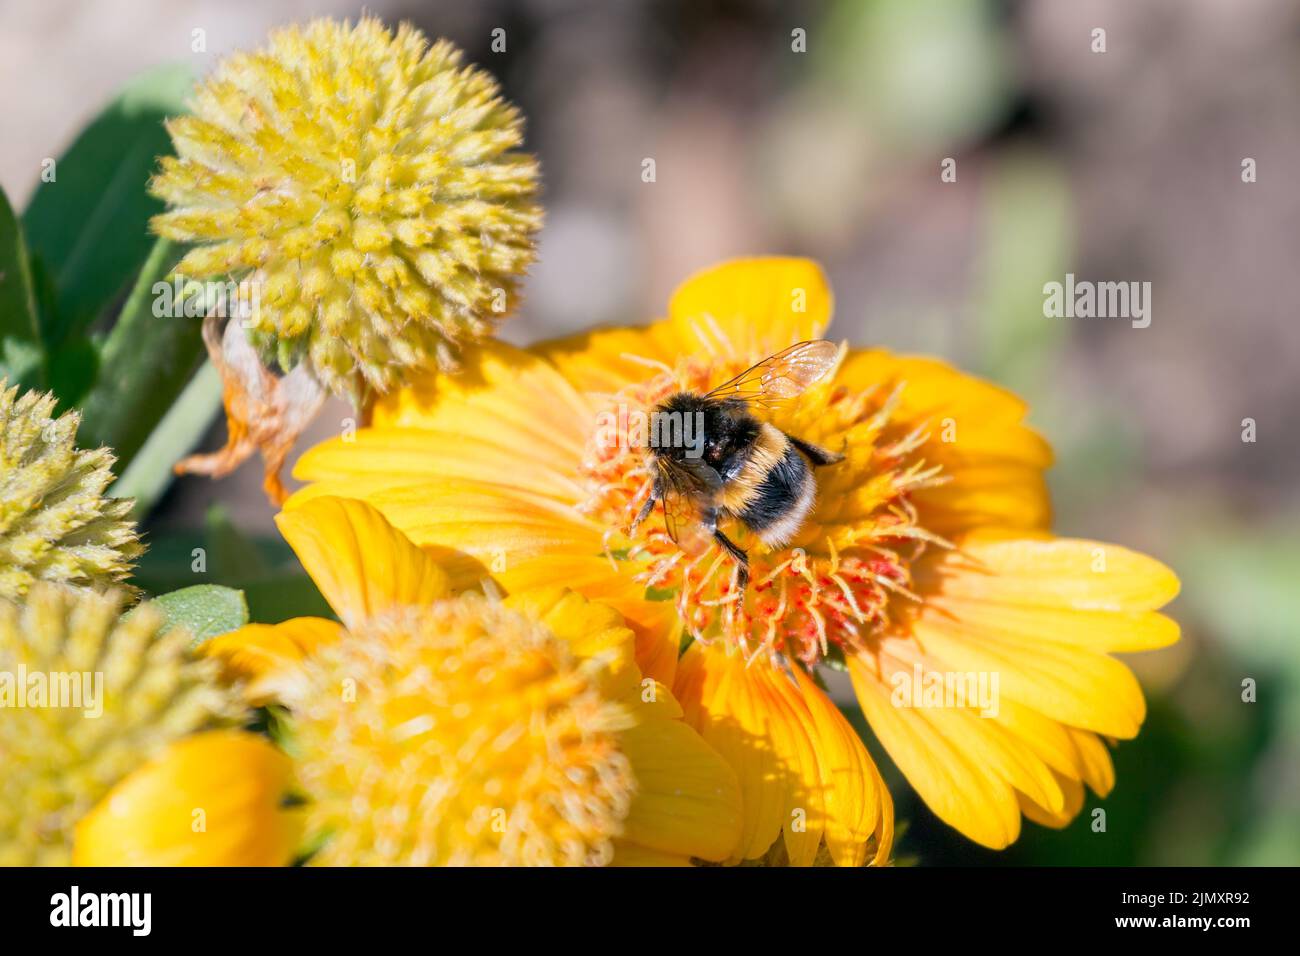 Bee feeding on a yellow Daisy Cultivated Flower Stock Photo